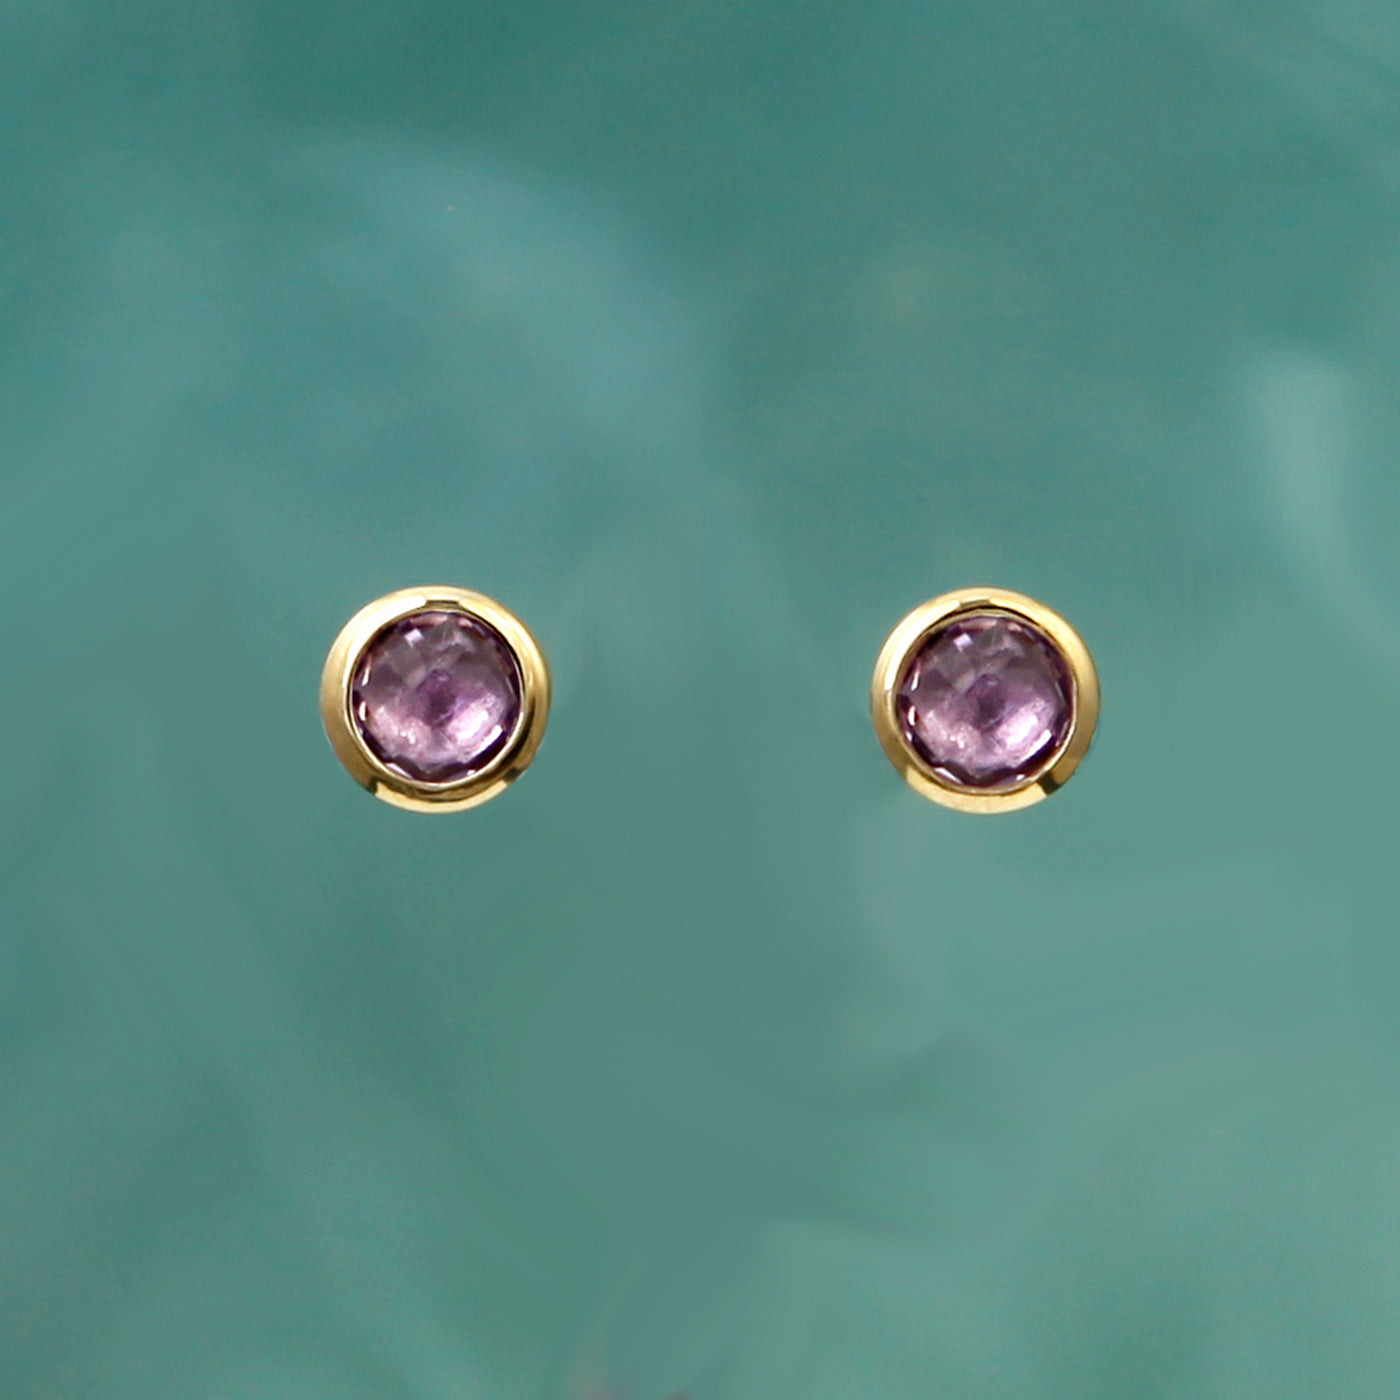 Photo of Gold and Amethyst Stud Earrings